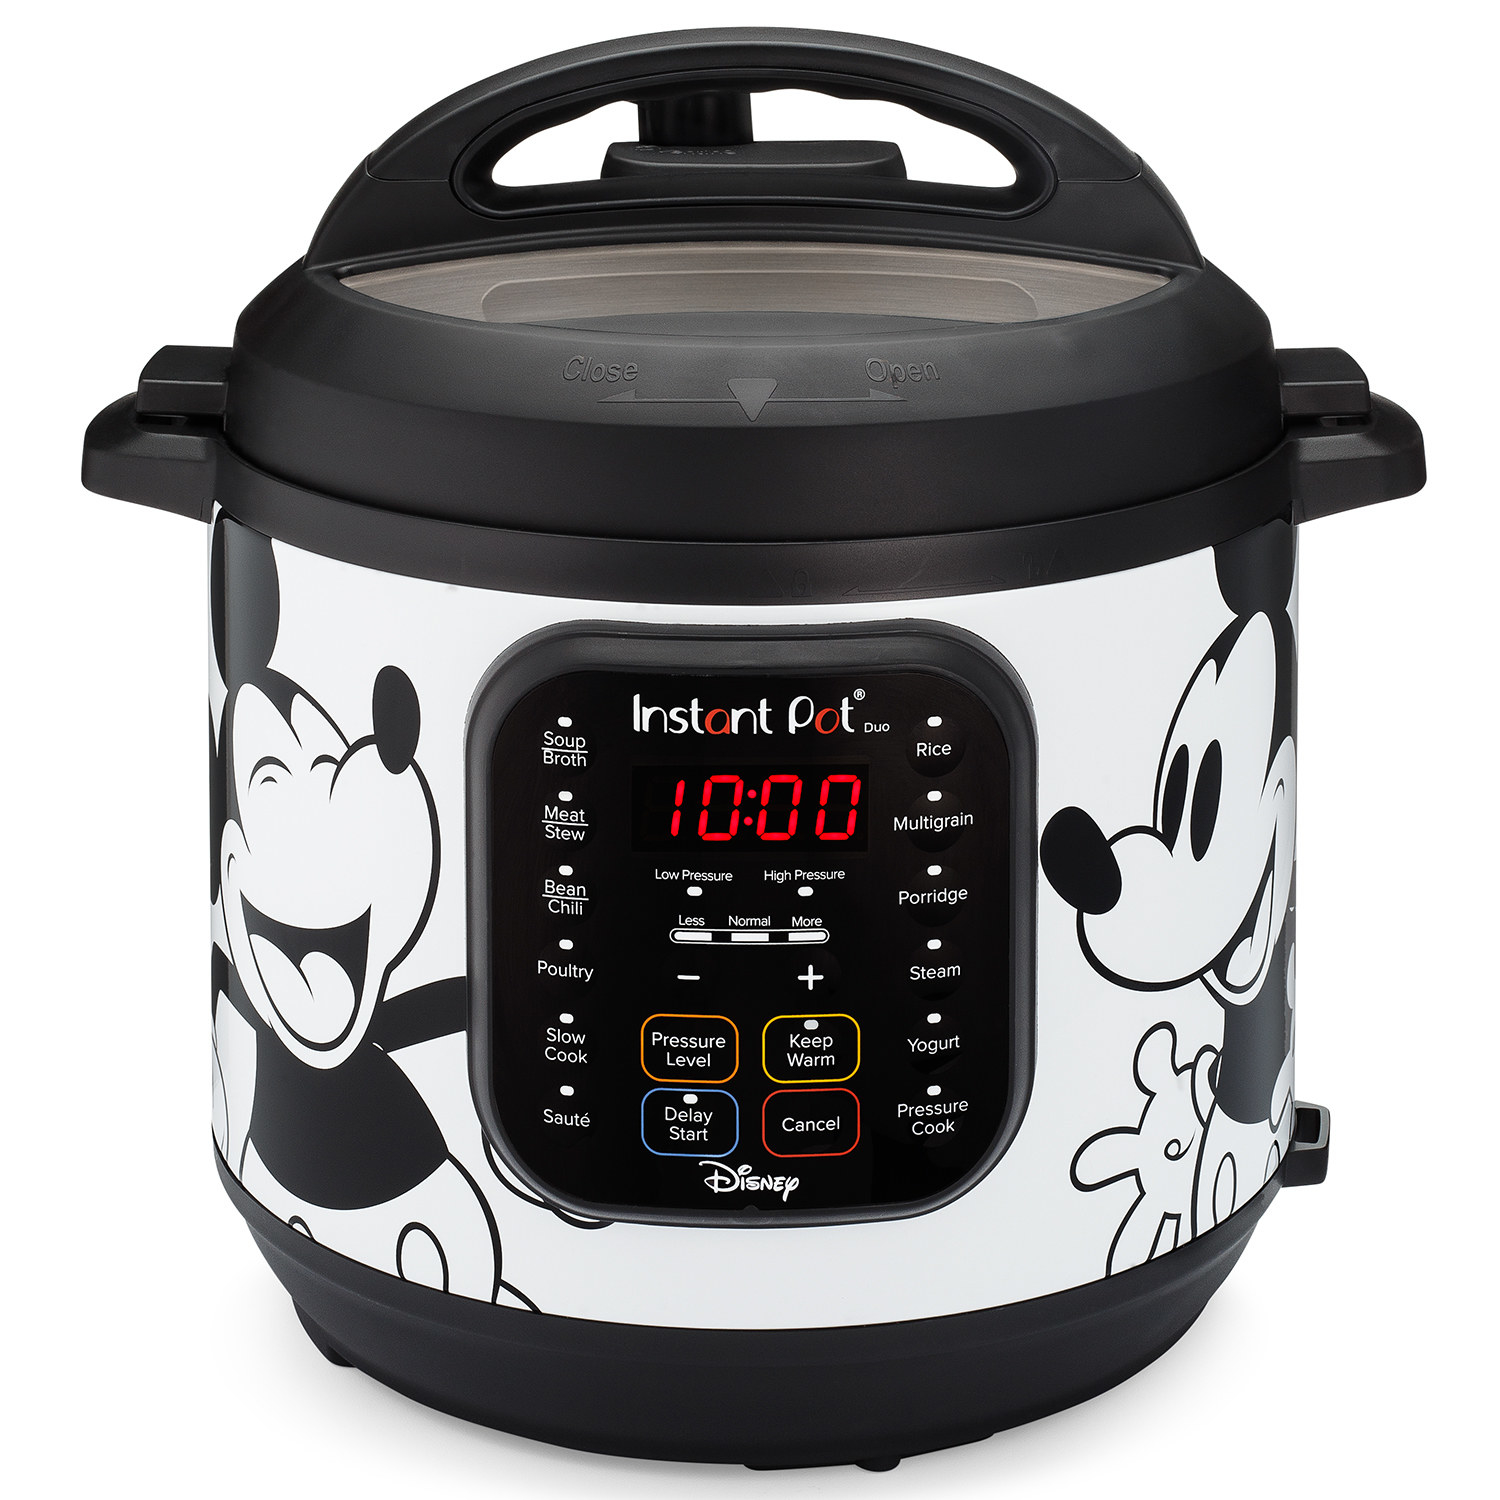 Instant pot with mickey mouse cartoon design on front